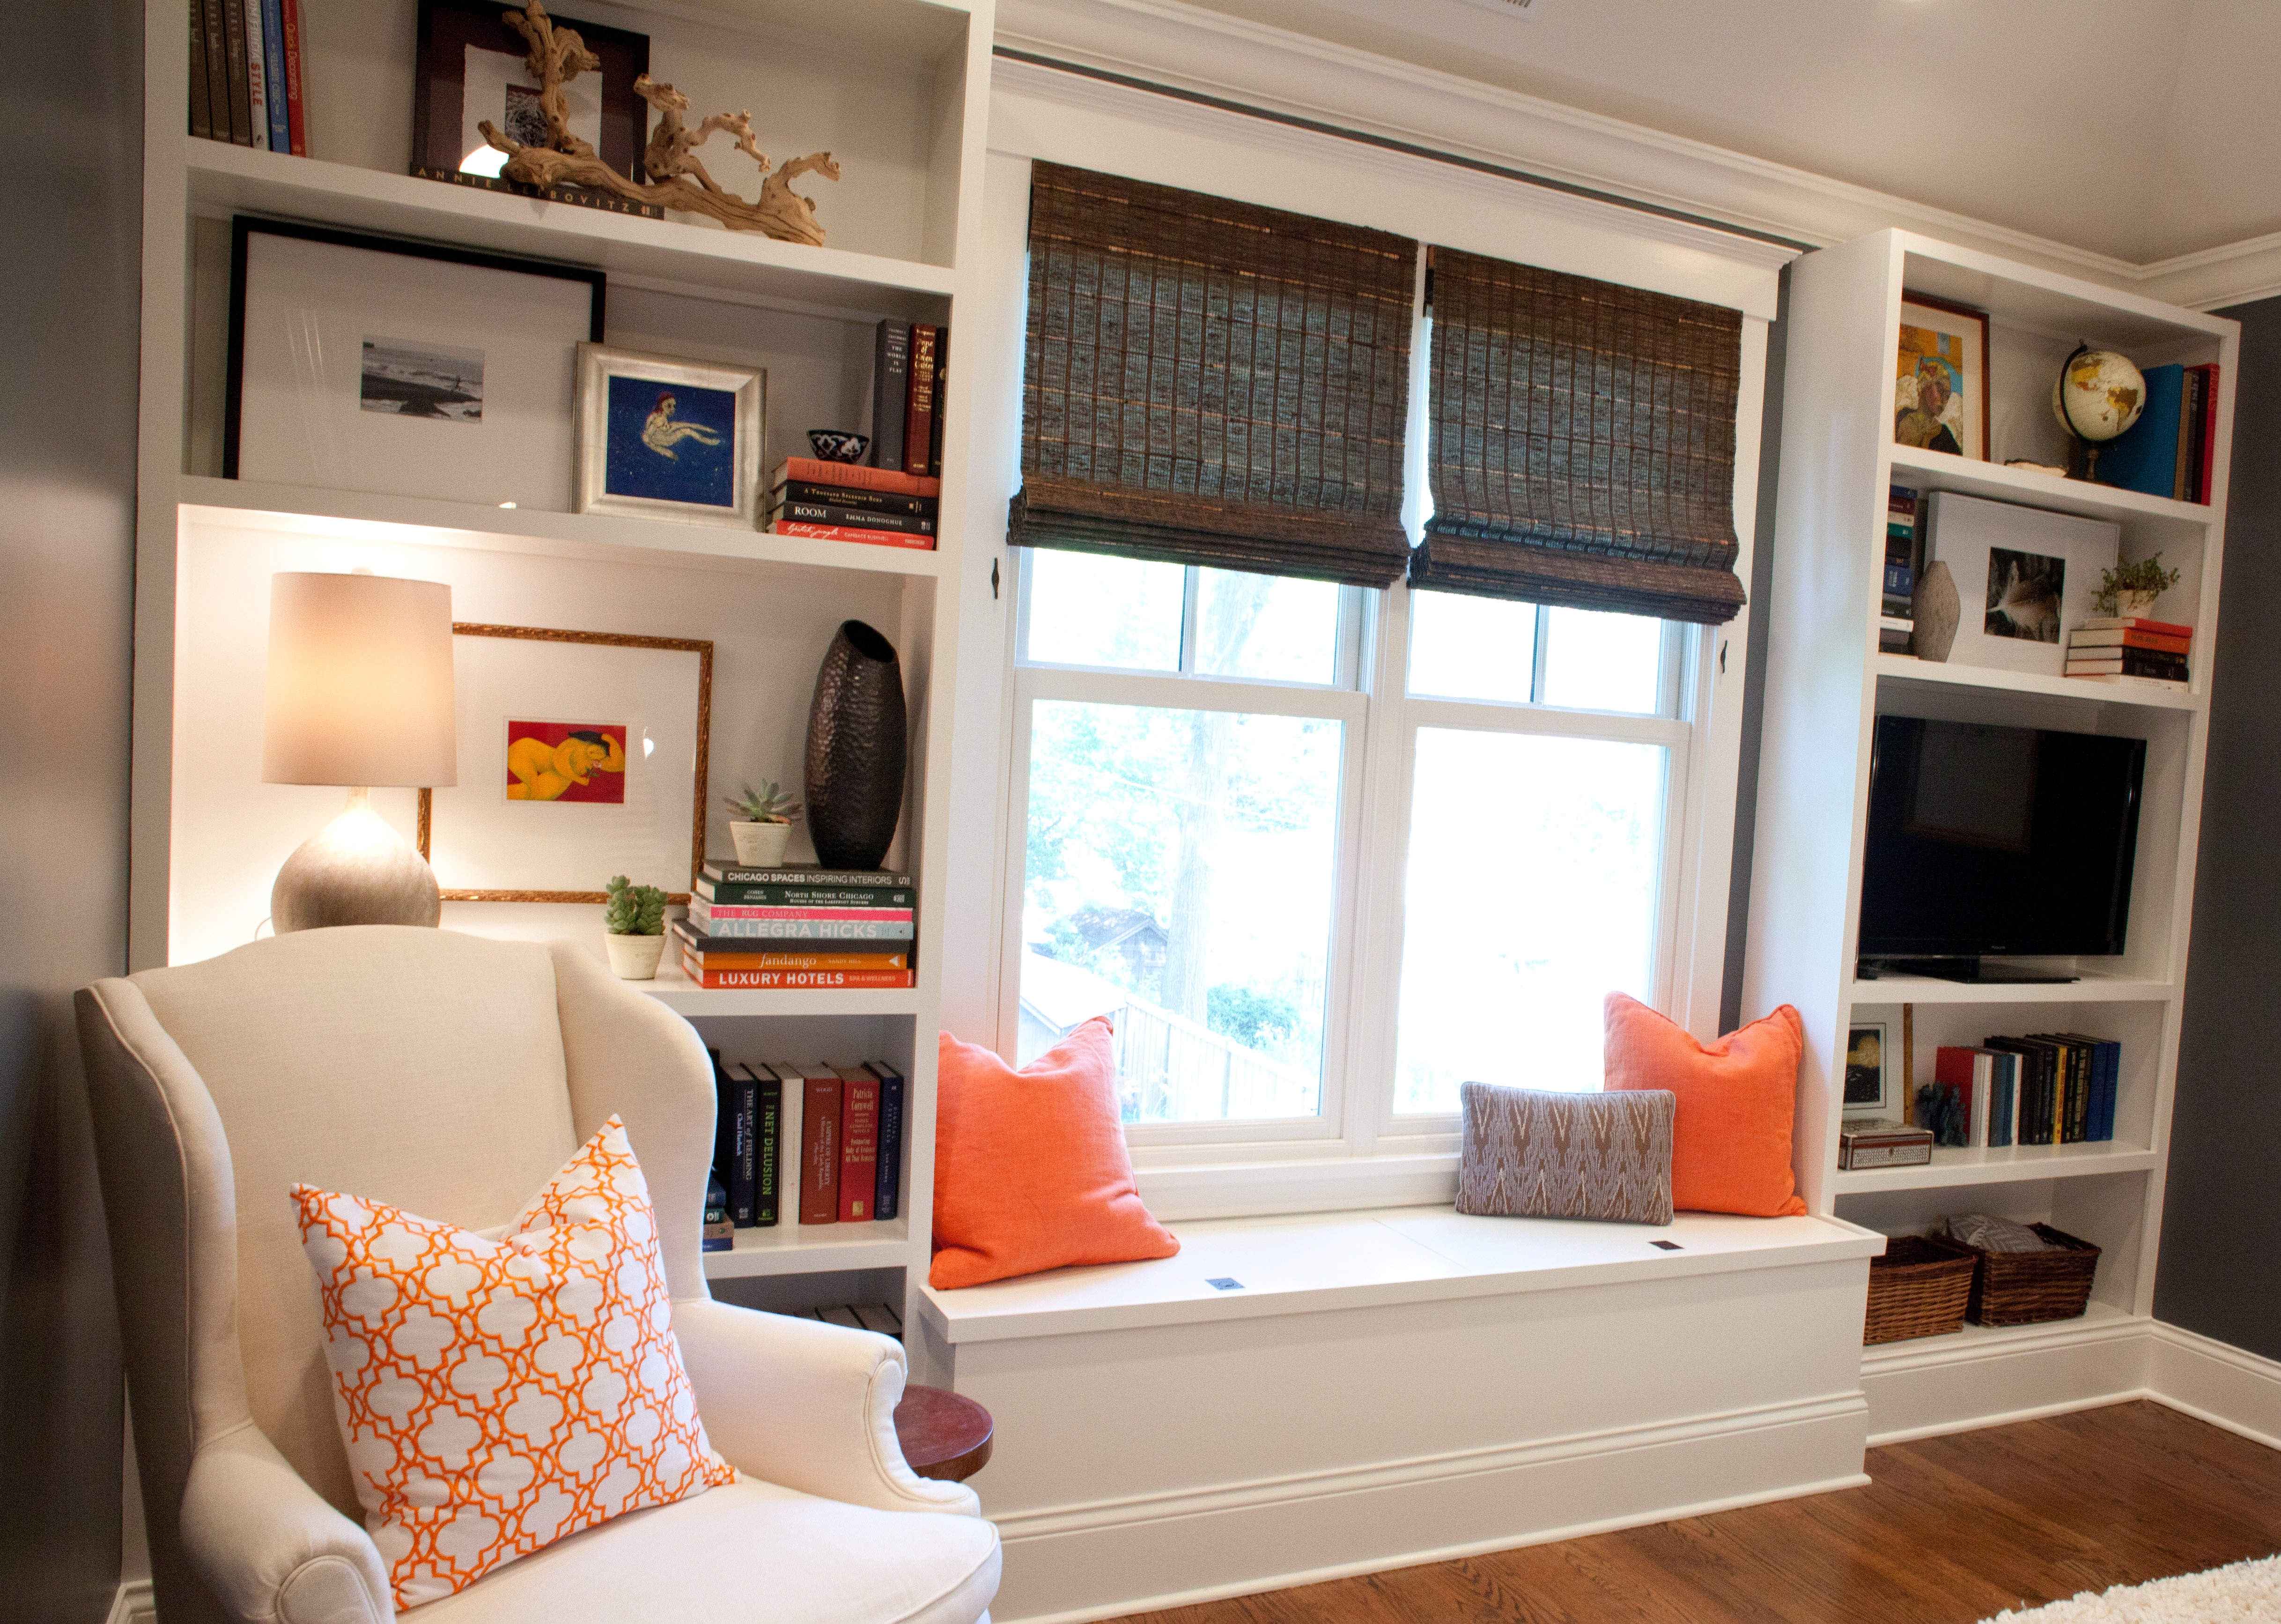 Master Bedroom Built-in Bookcases After Styling | twoinspiredesign